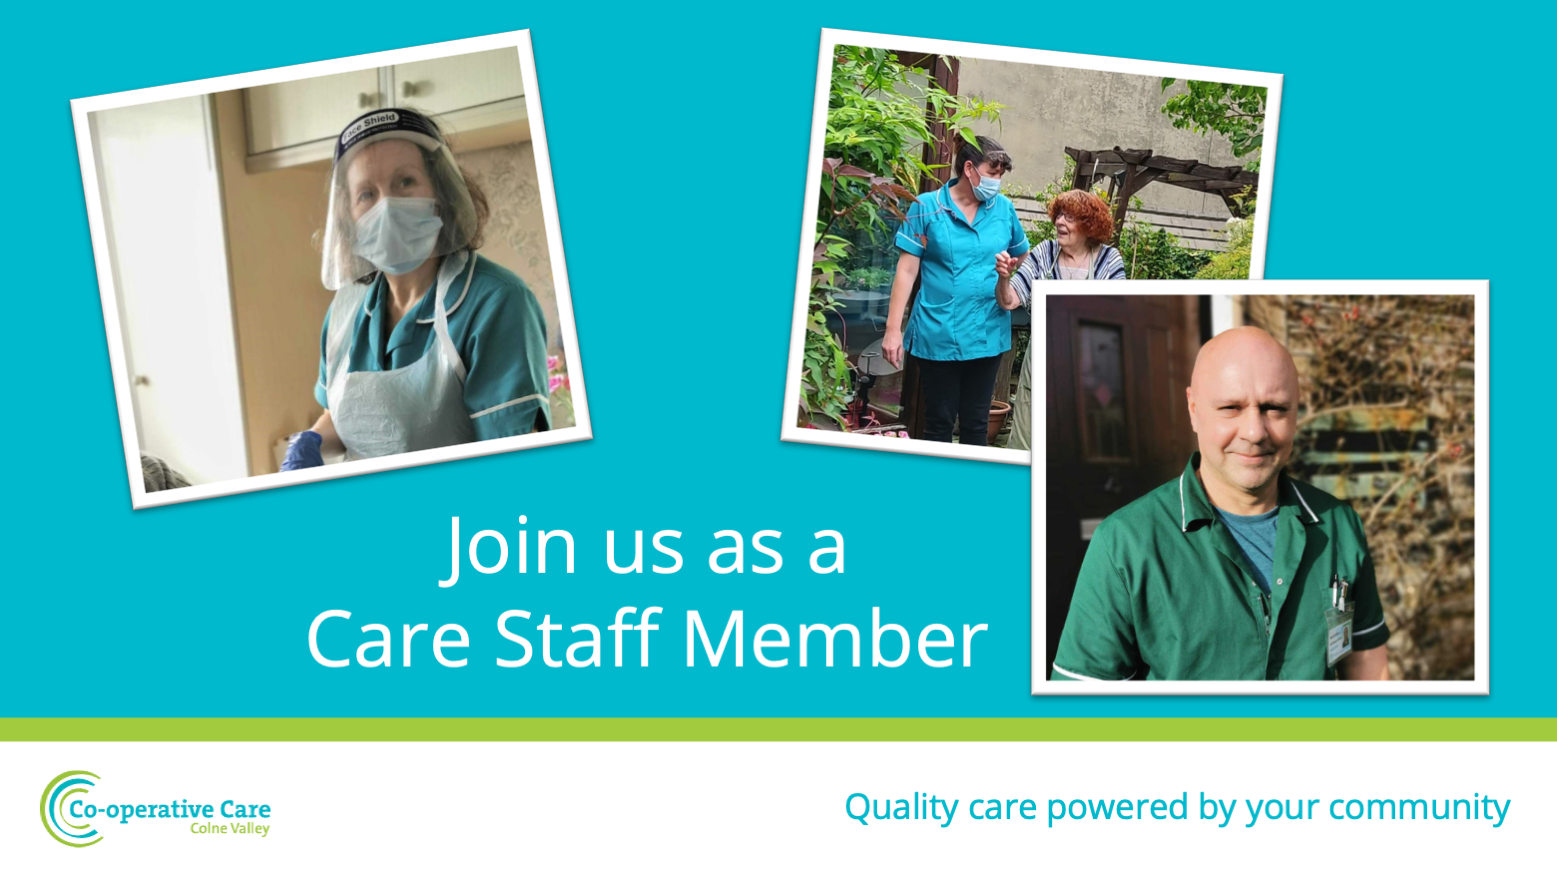 Montage for Care Staff recruitment in the Colne Valley